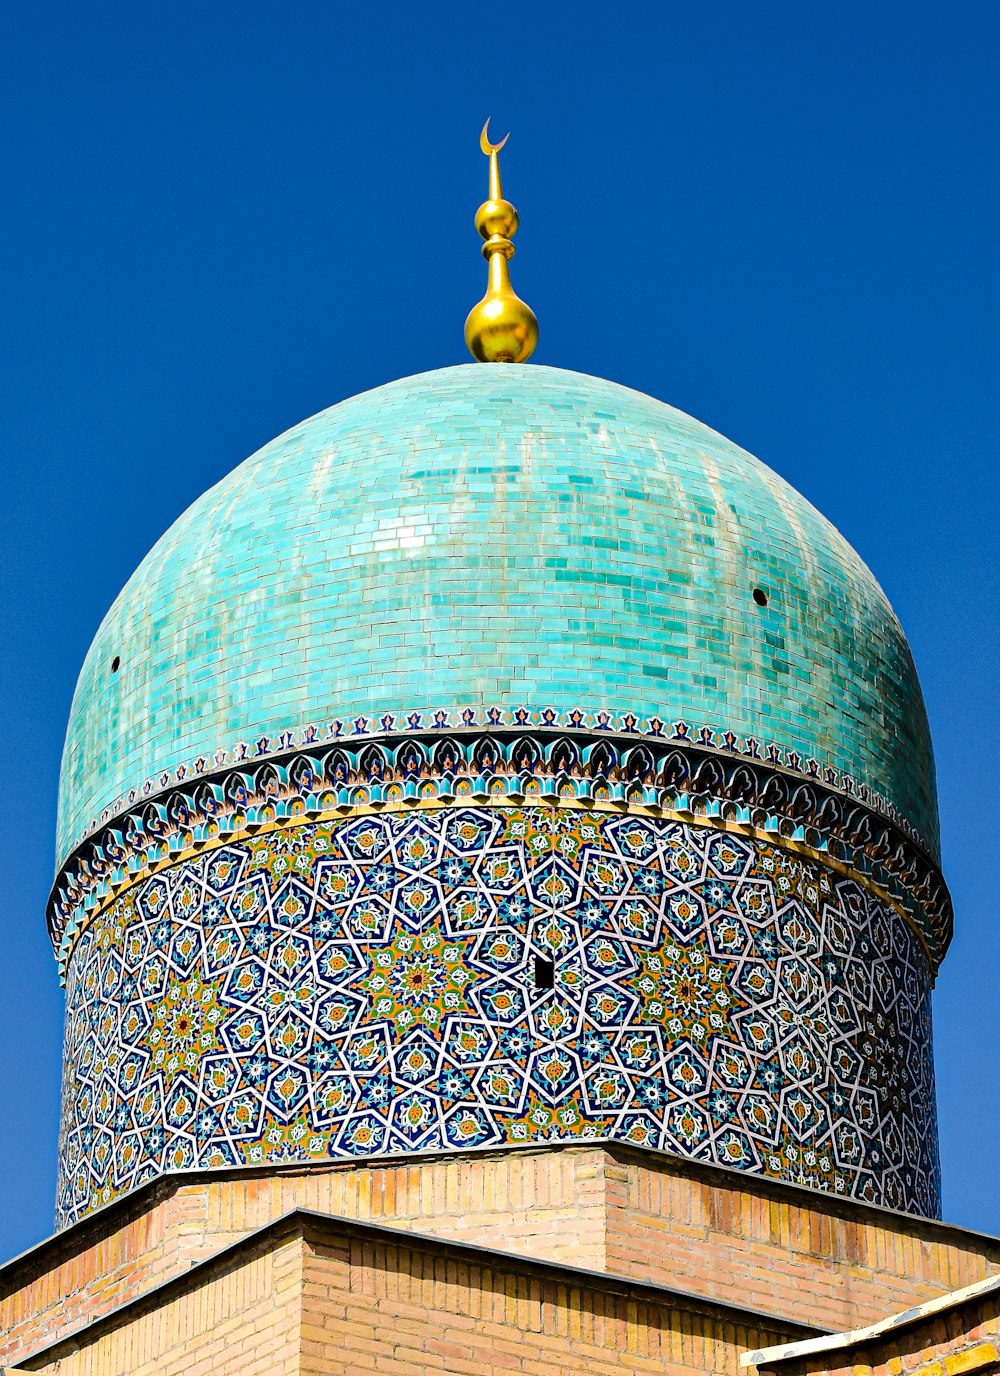 a domed building with a gold statue on top